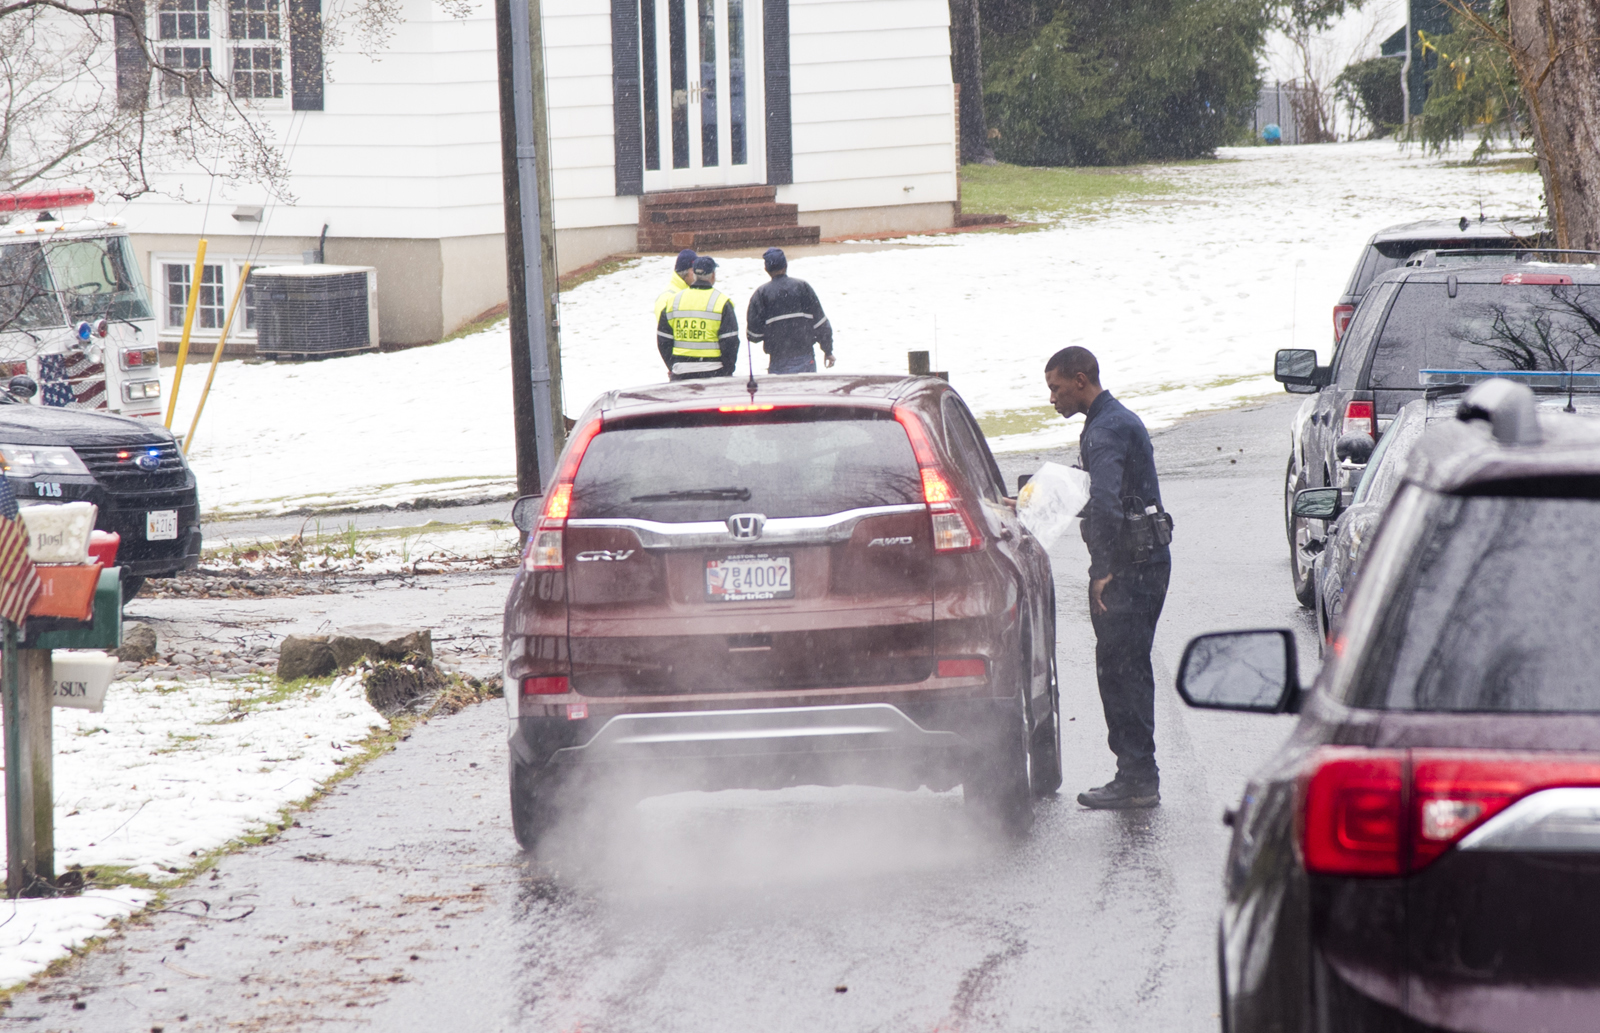 PHOTO: Police investigate the scene of a suspected murder and suicide in Crownsville, Md., March 7th, 2018.